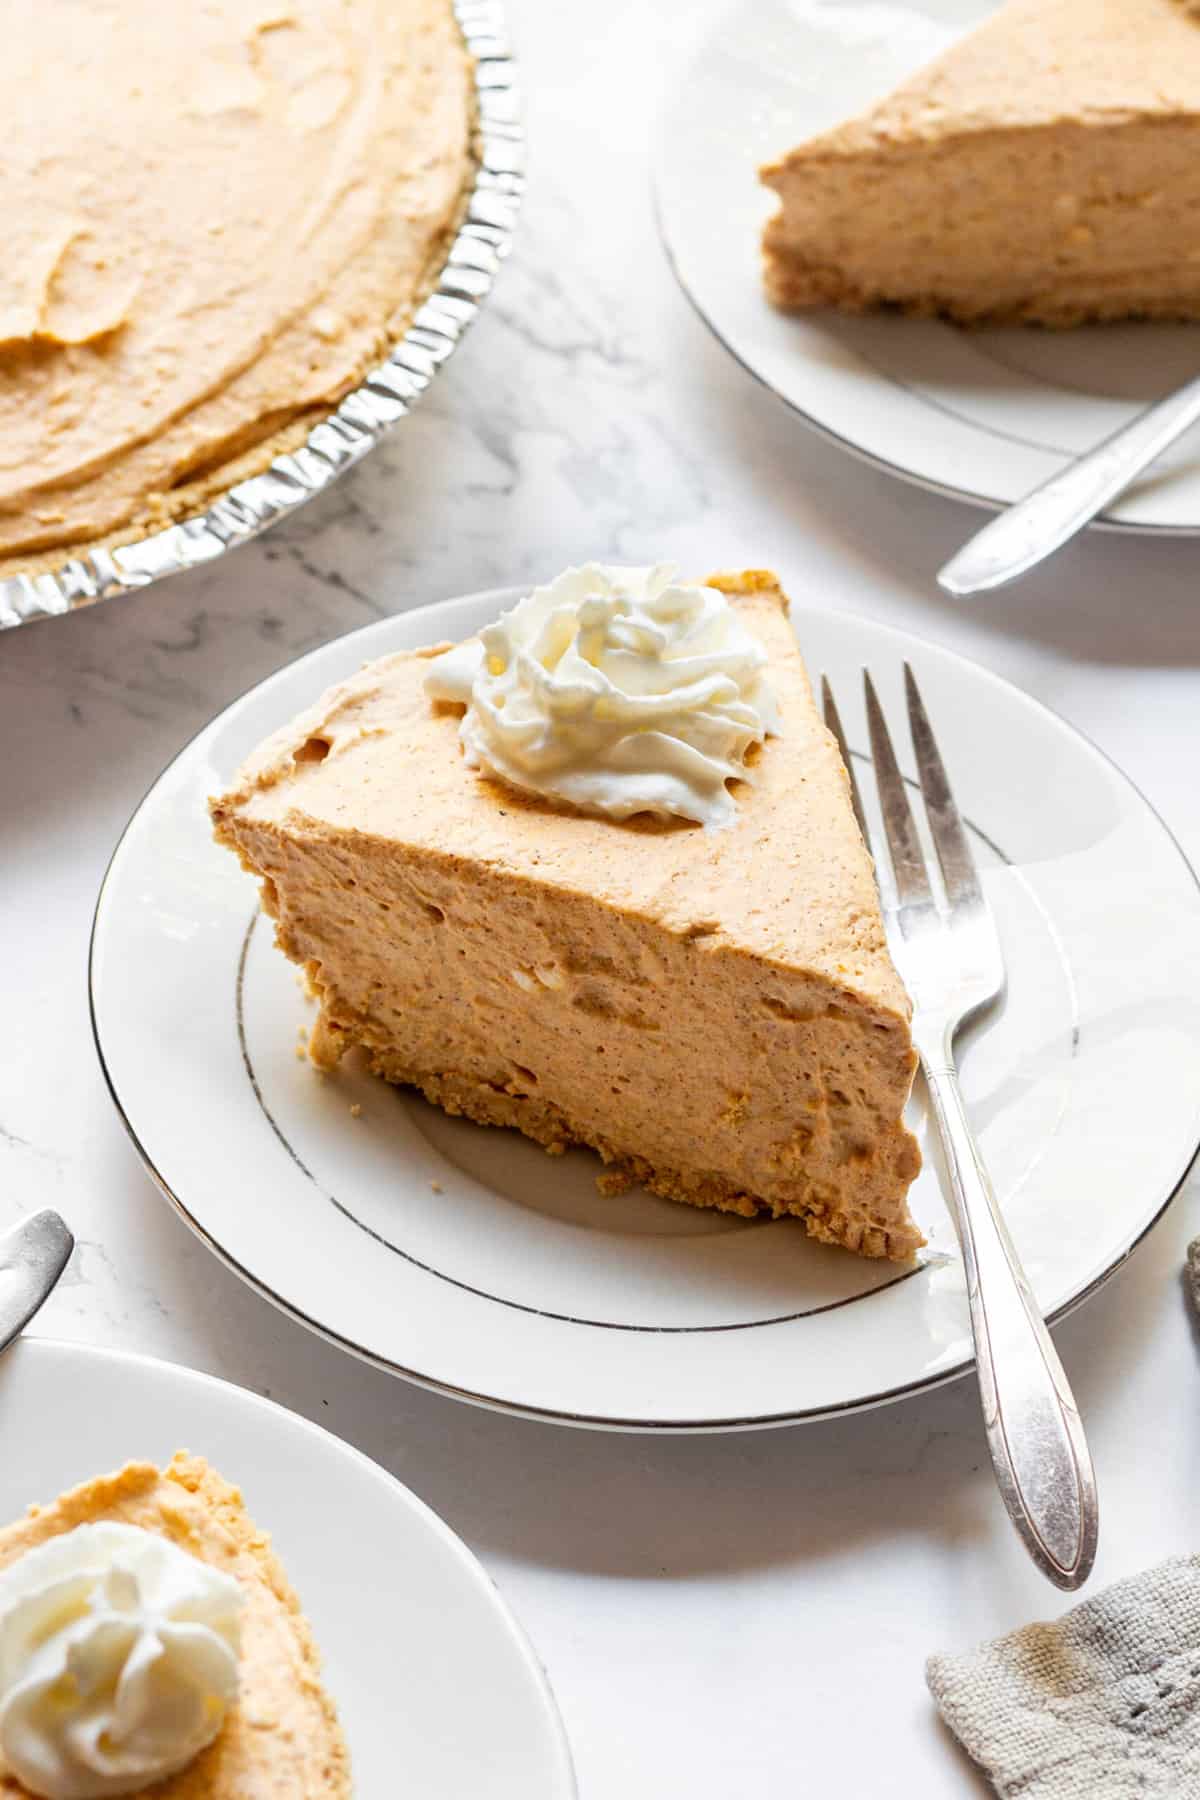 slice of no bake pumpkin cheesecake with whipped cream on top served on a white round plate with a silver fork